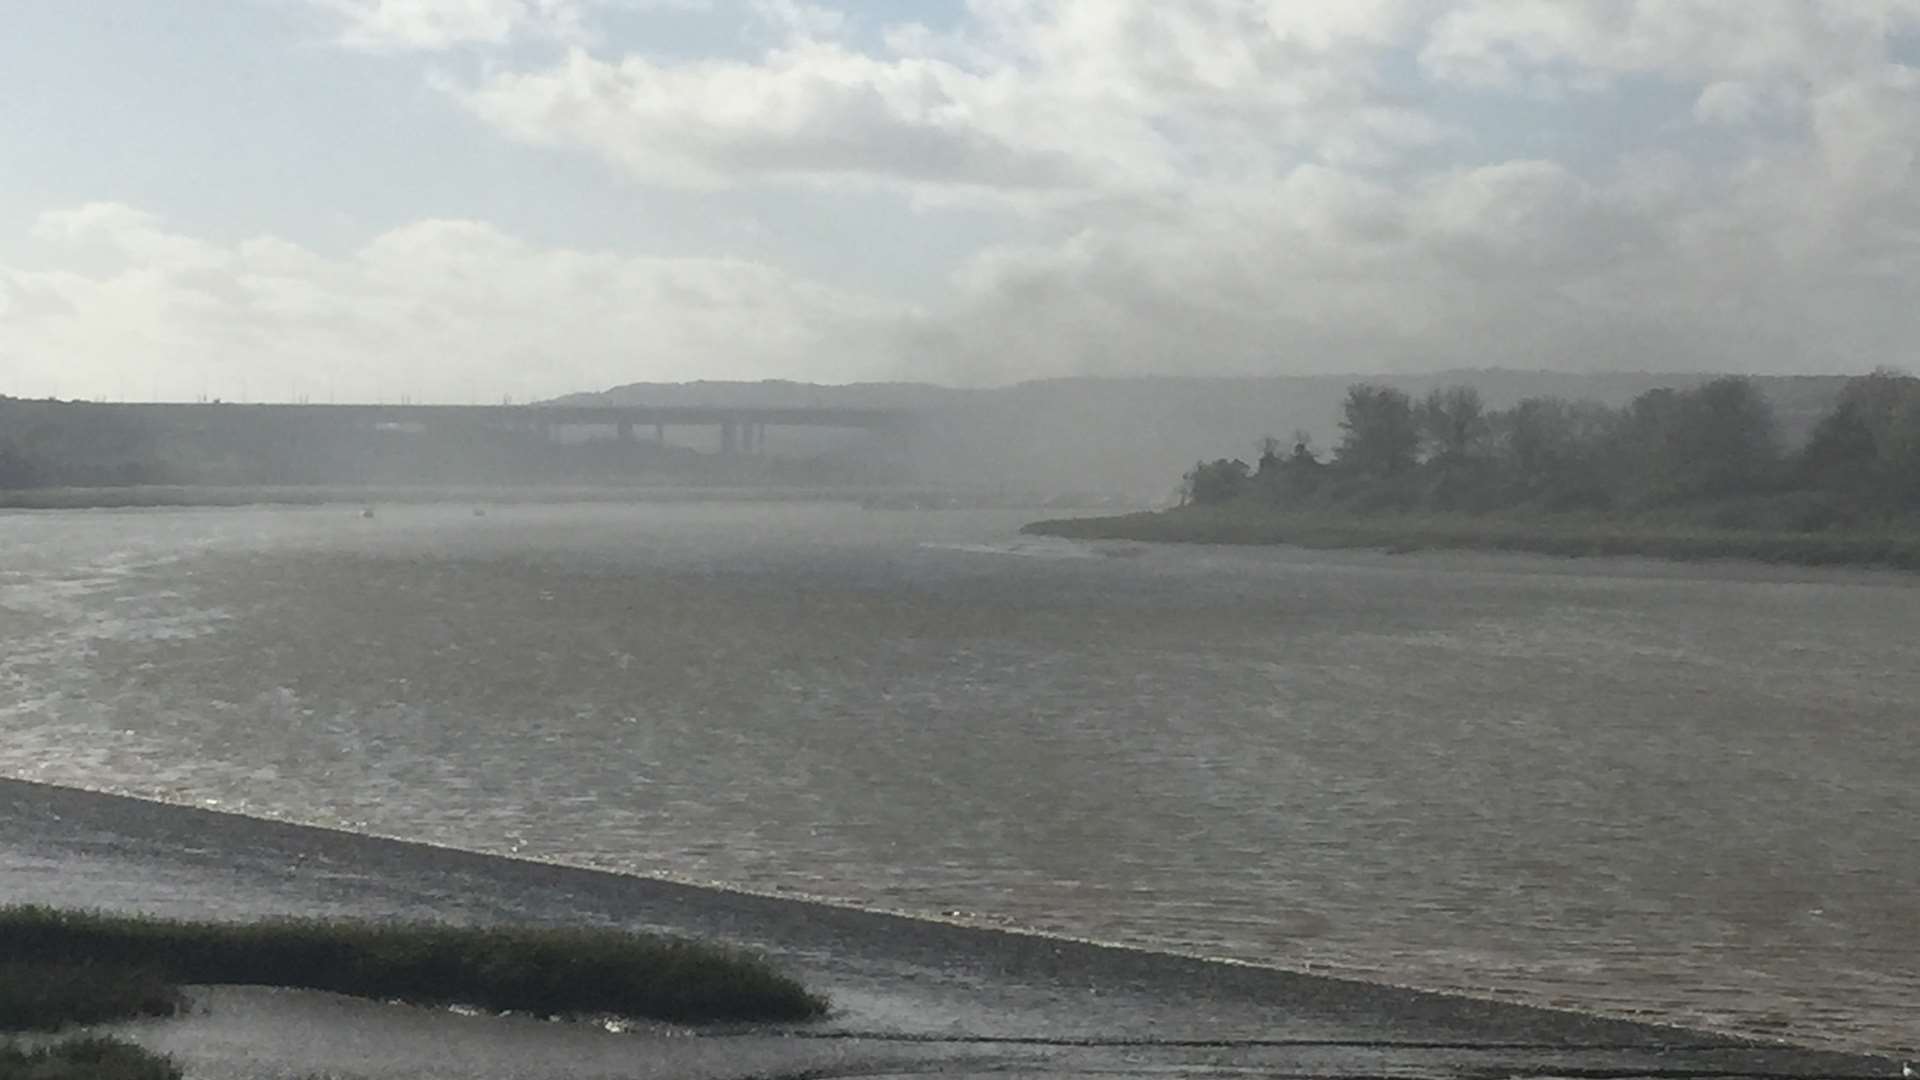 Smoke from the fire is billowing across the River Medway. Picture: Lizzie Massey.